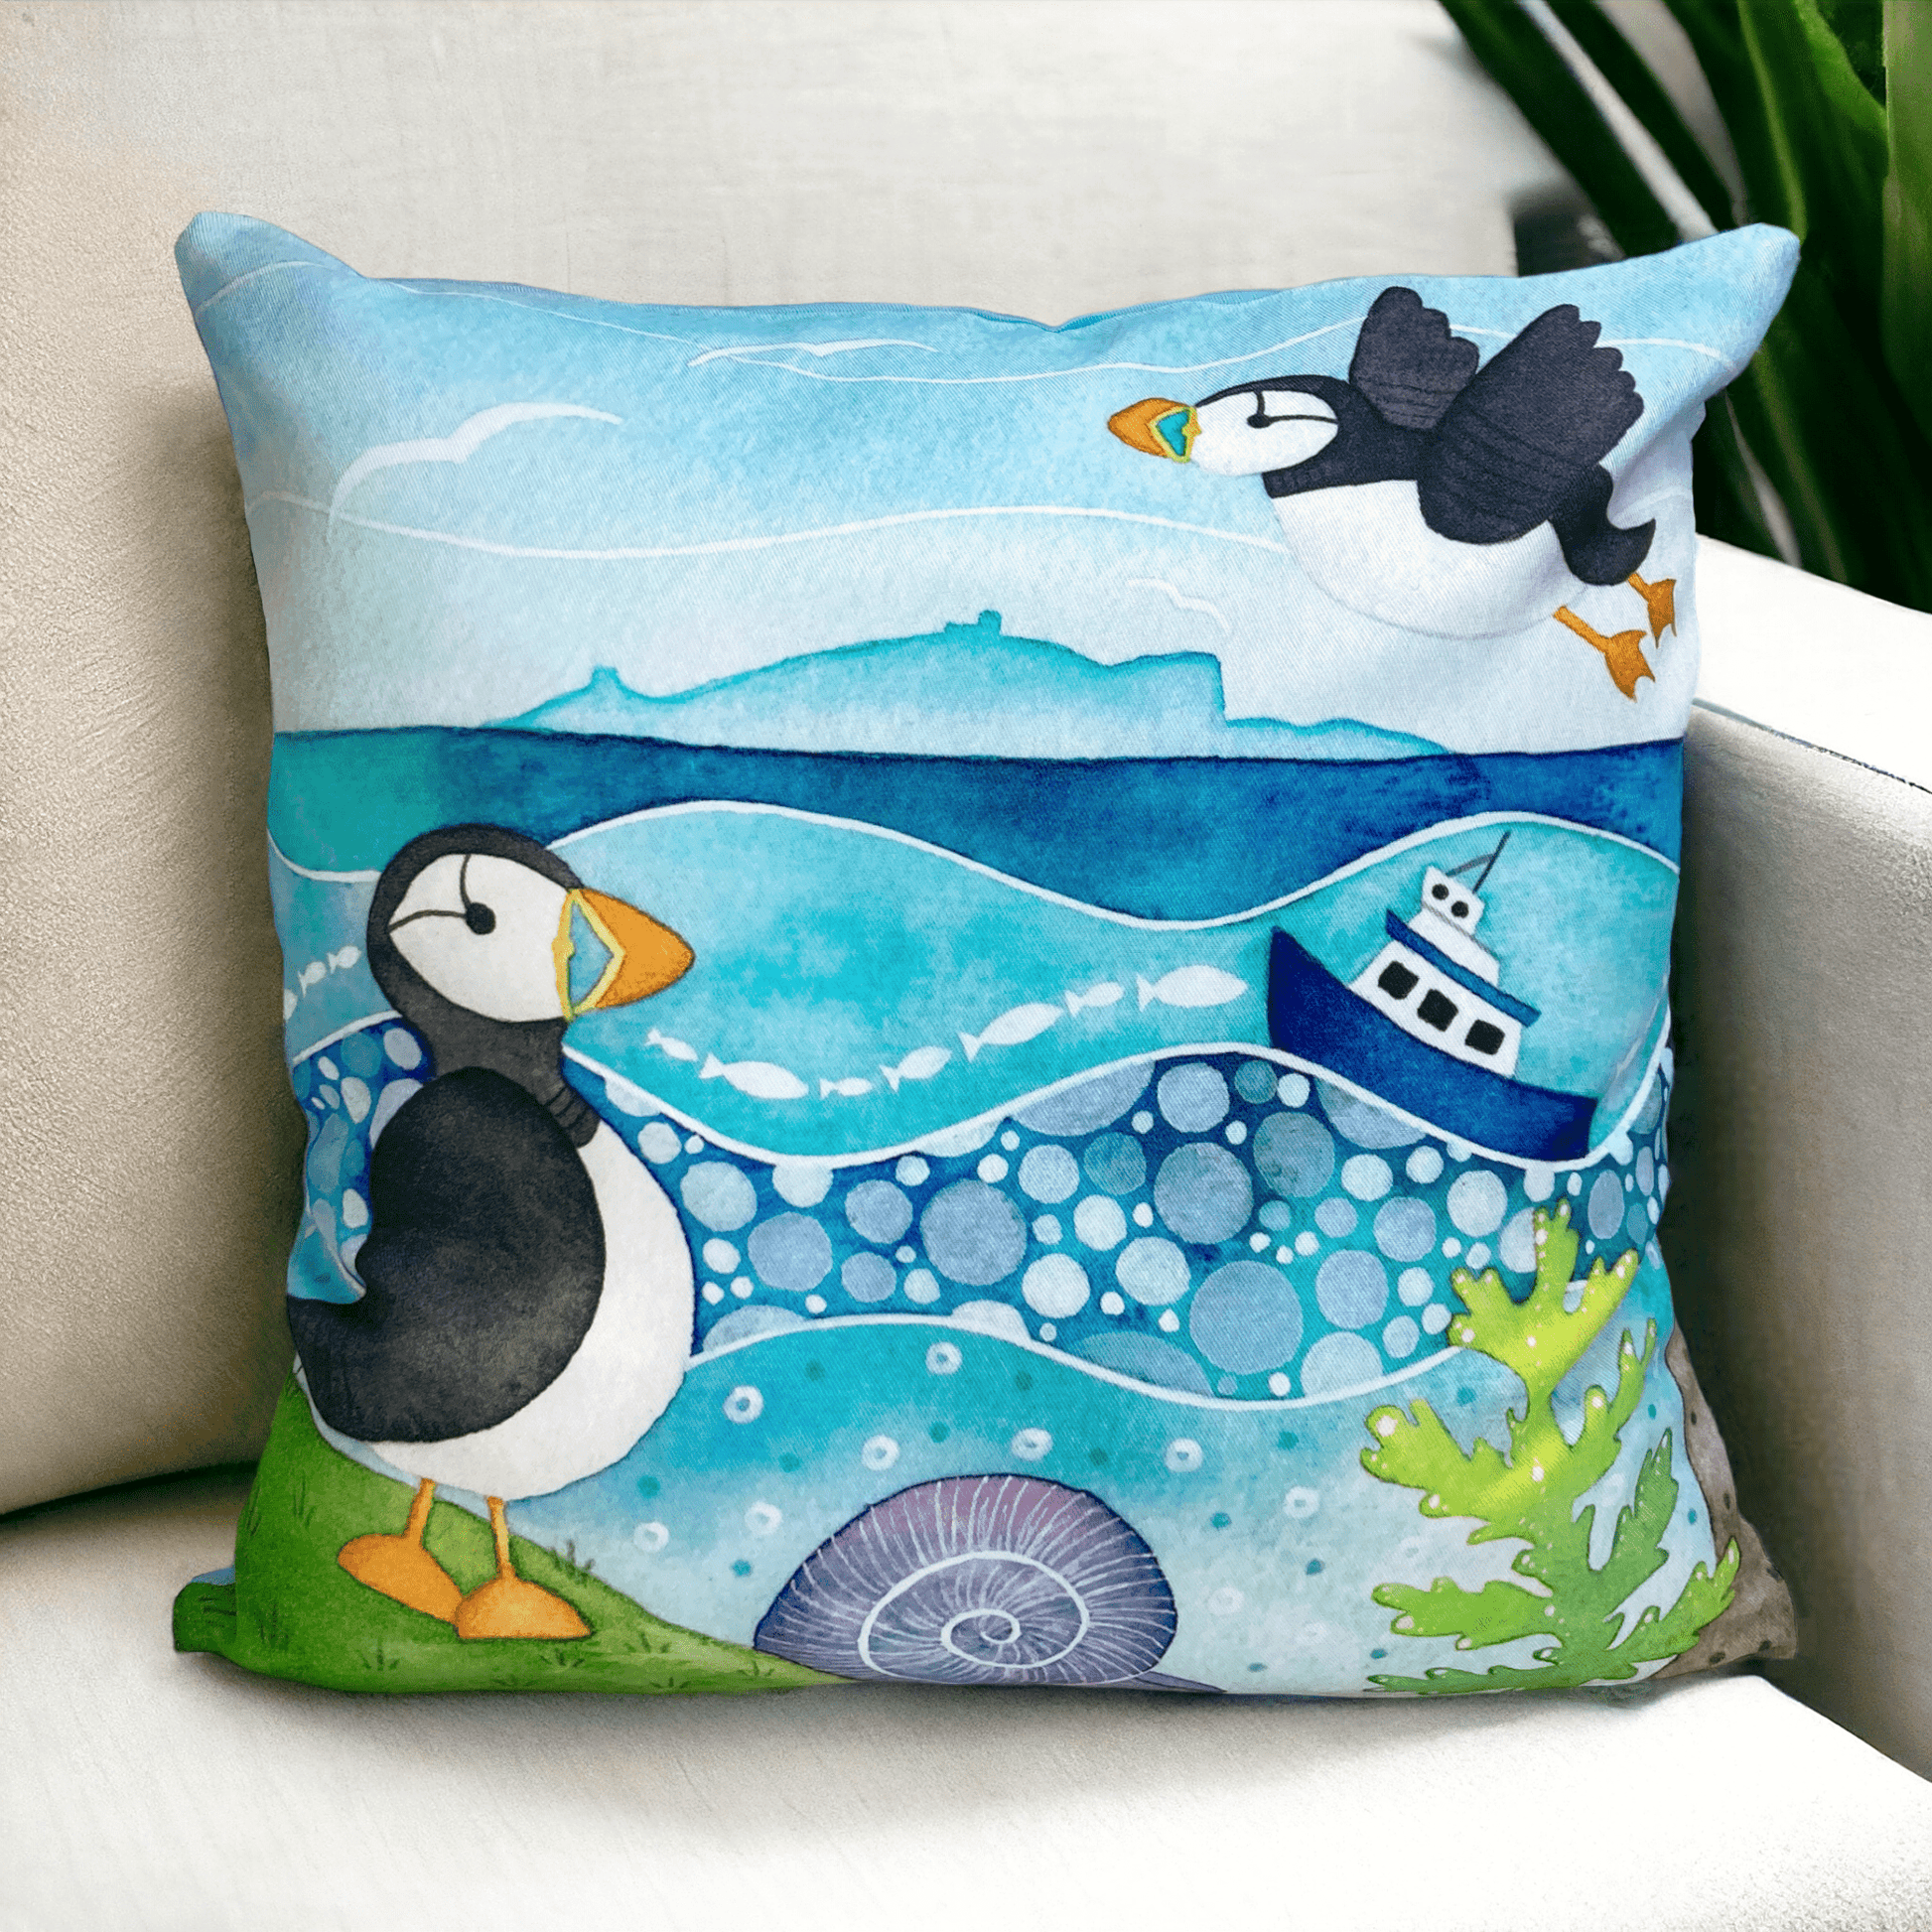 Cushion Cover - Puffins and the Isle of May - Seaside Watercolours - East Neuk Beach Crafts